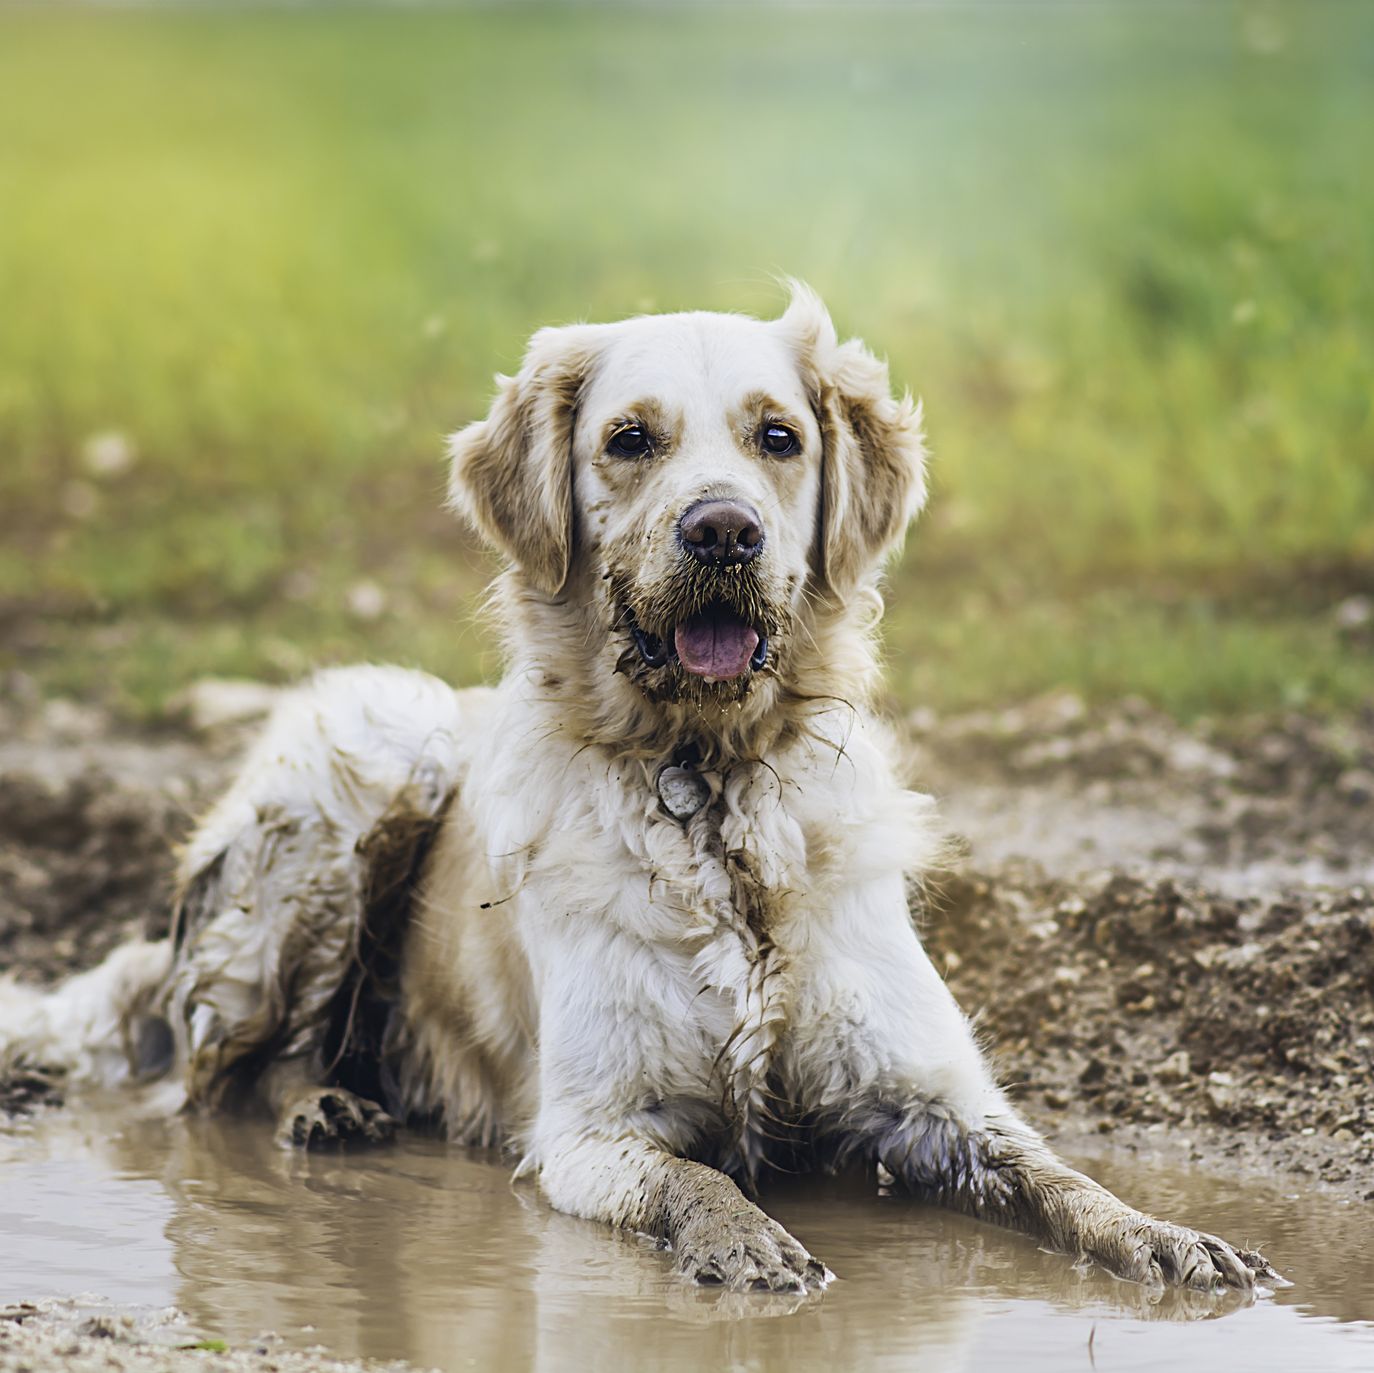 dog in muddy puddle